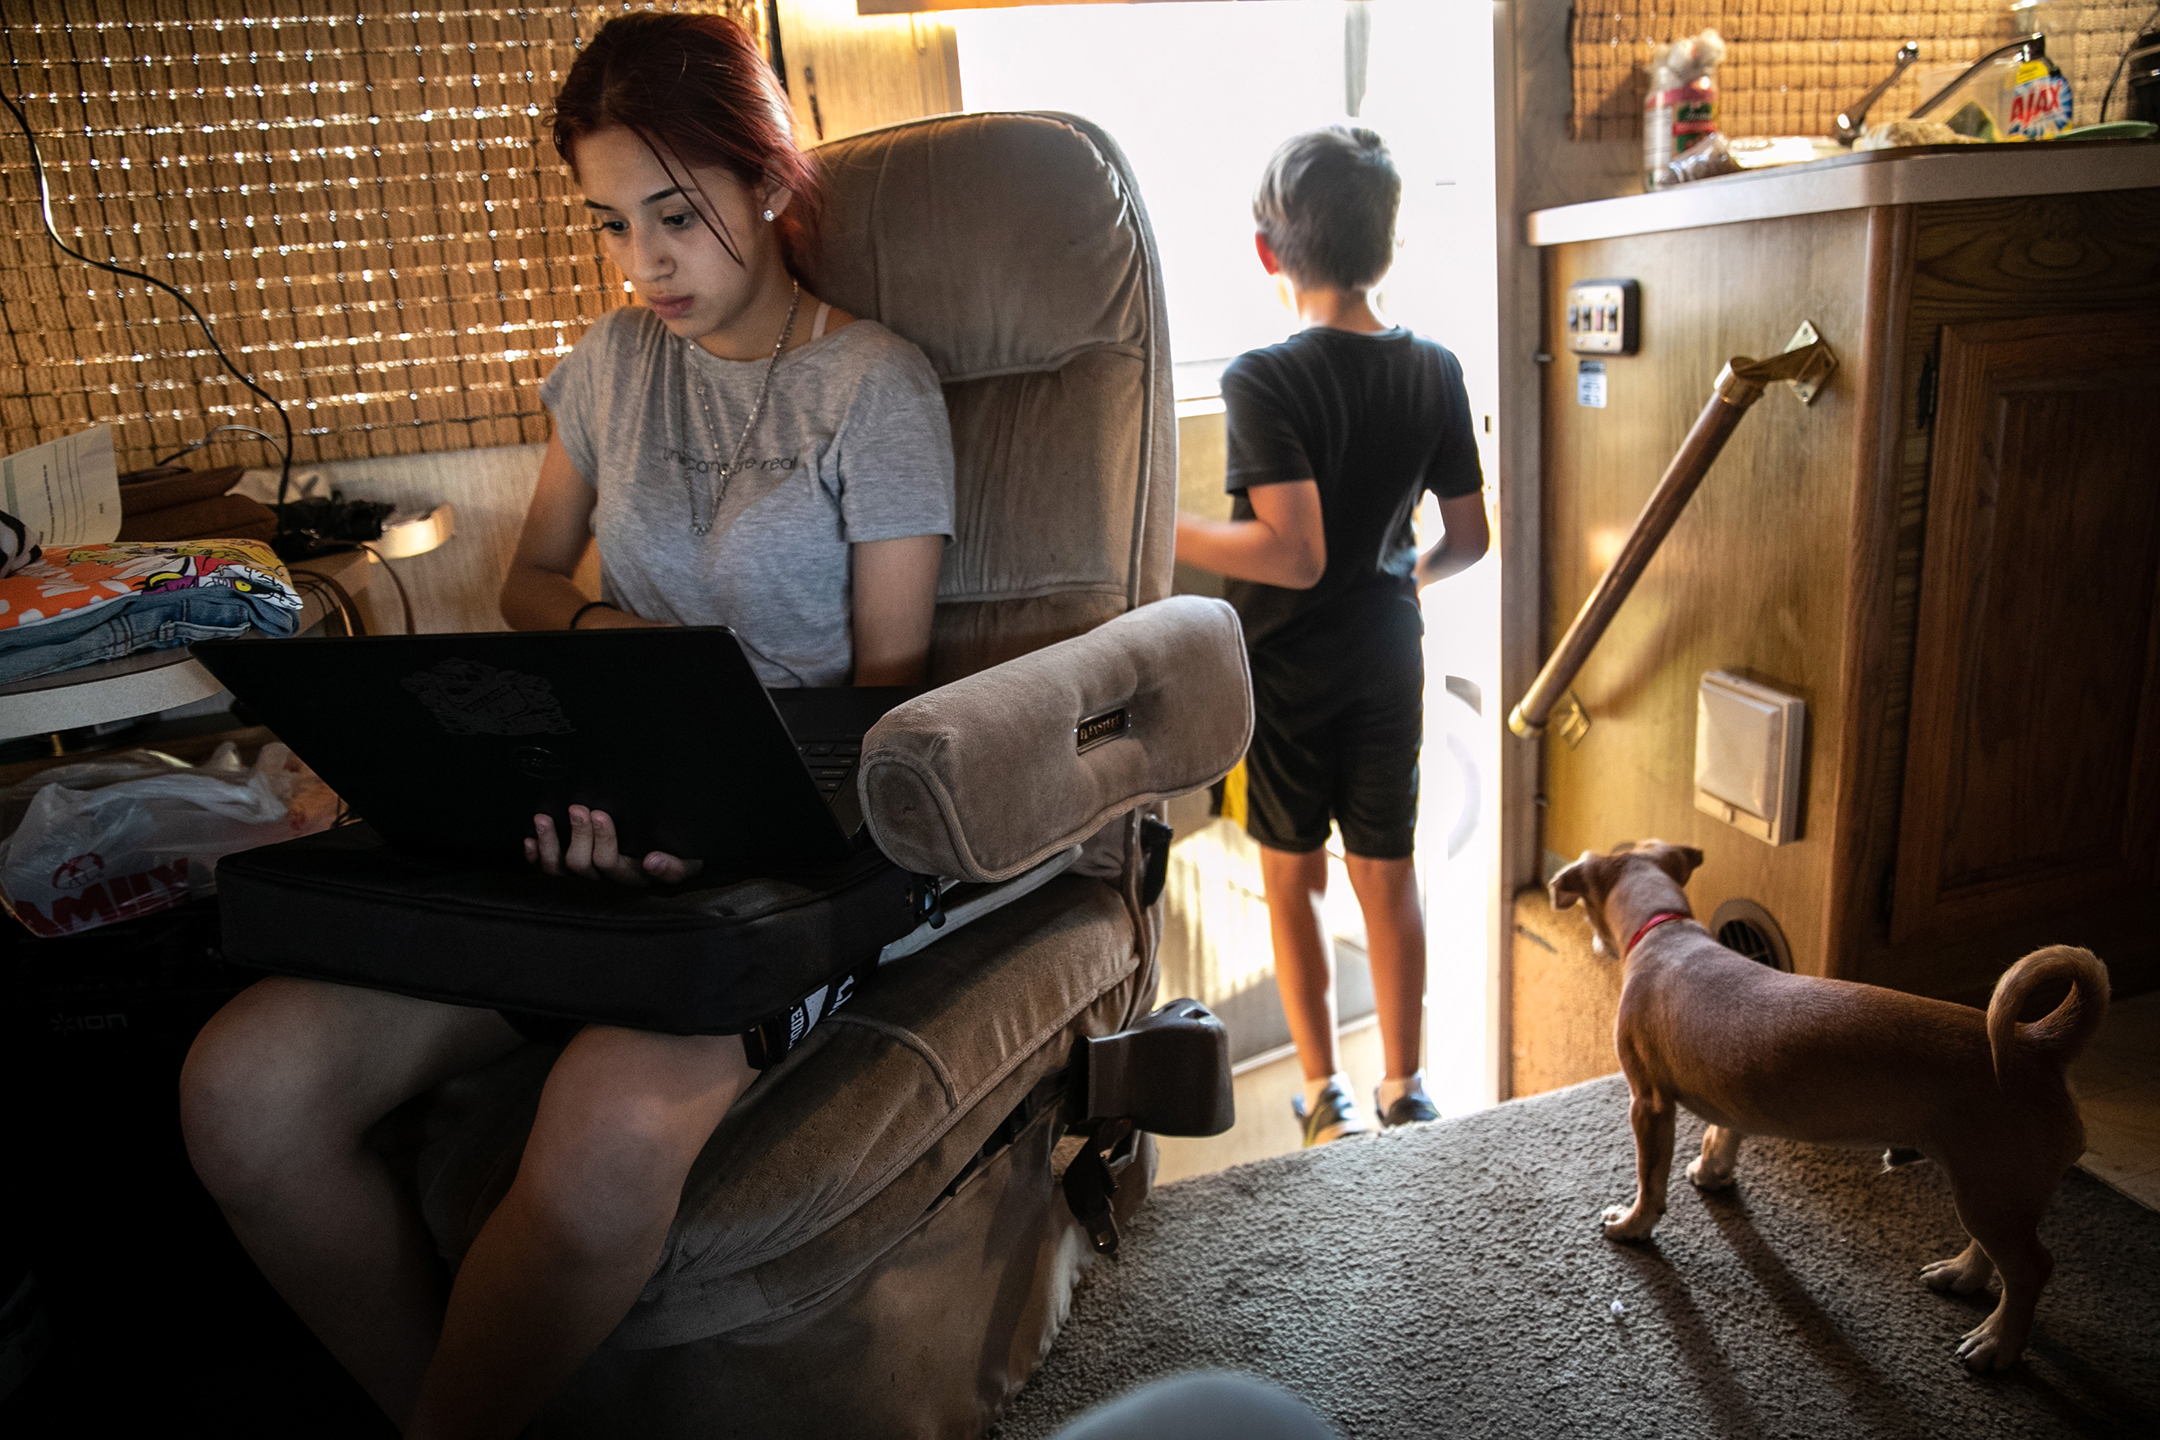 A young woman sits in a recliner with a laptop computer near the open door inside a cluttered RV